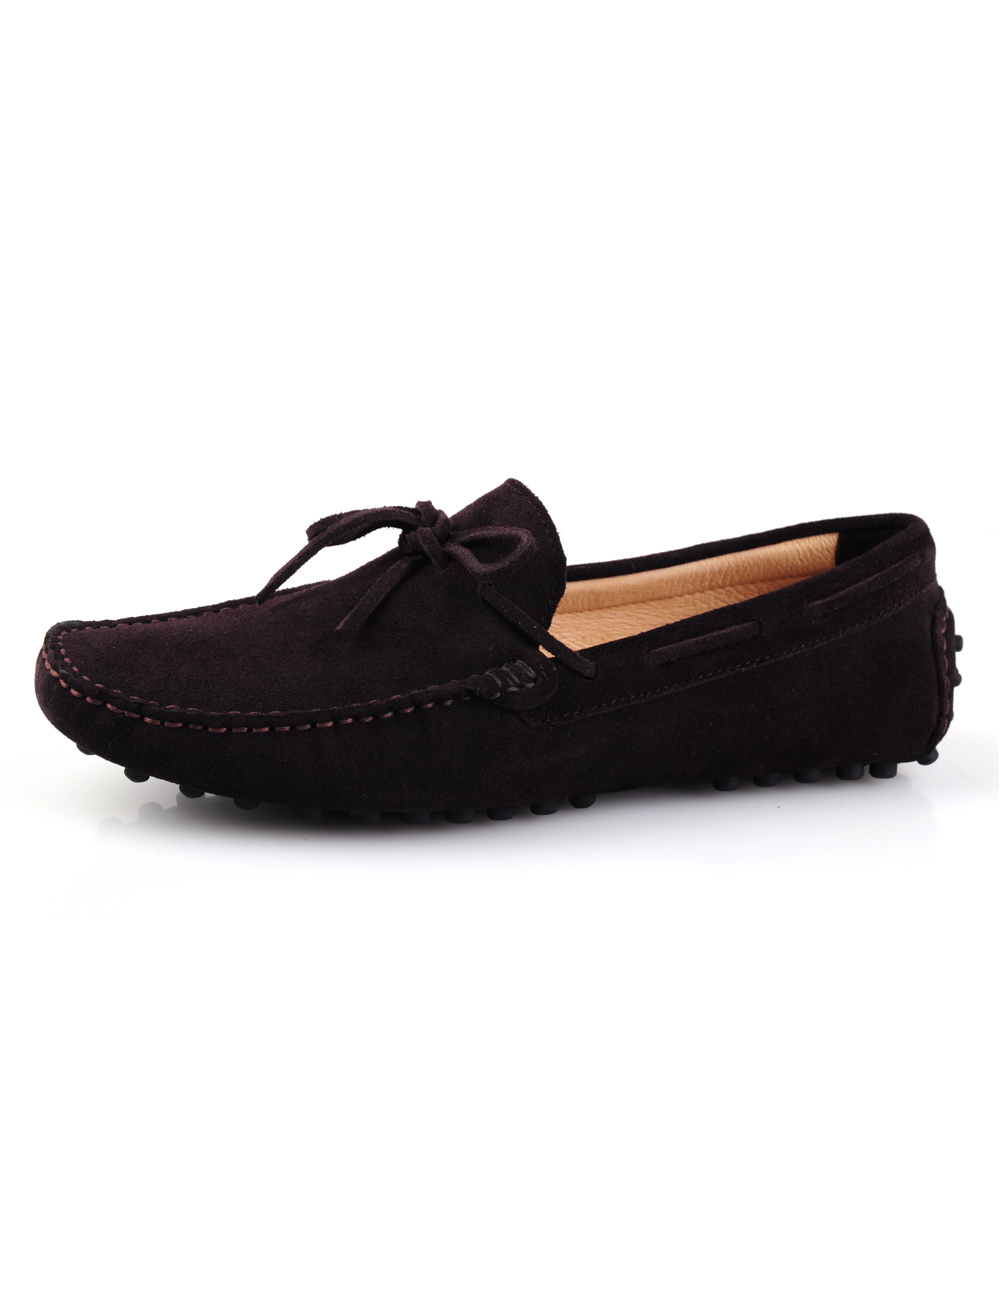 mens comfy loafers